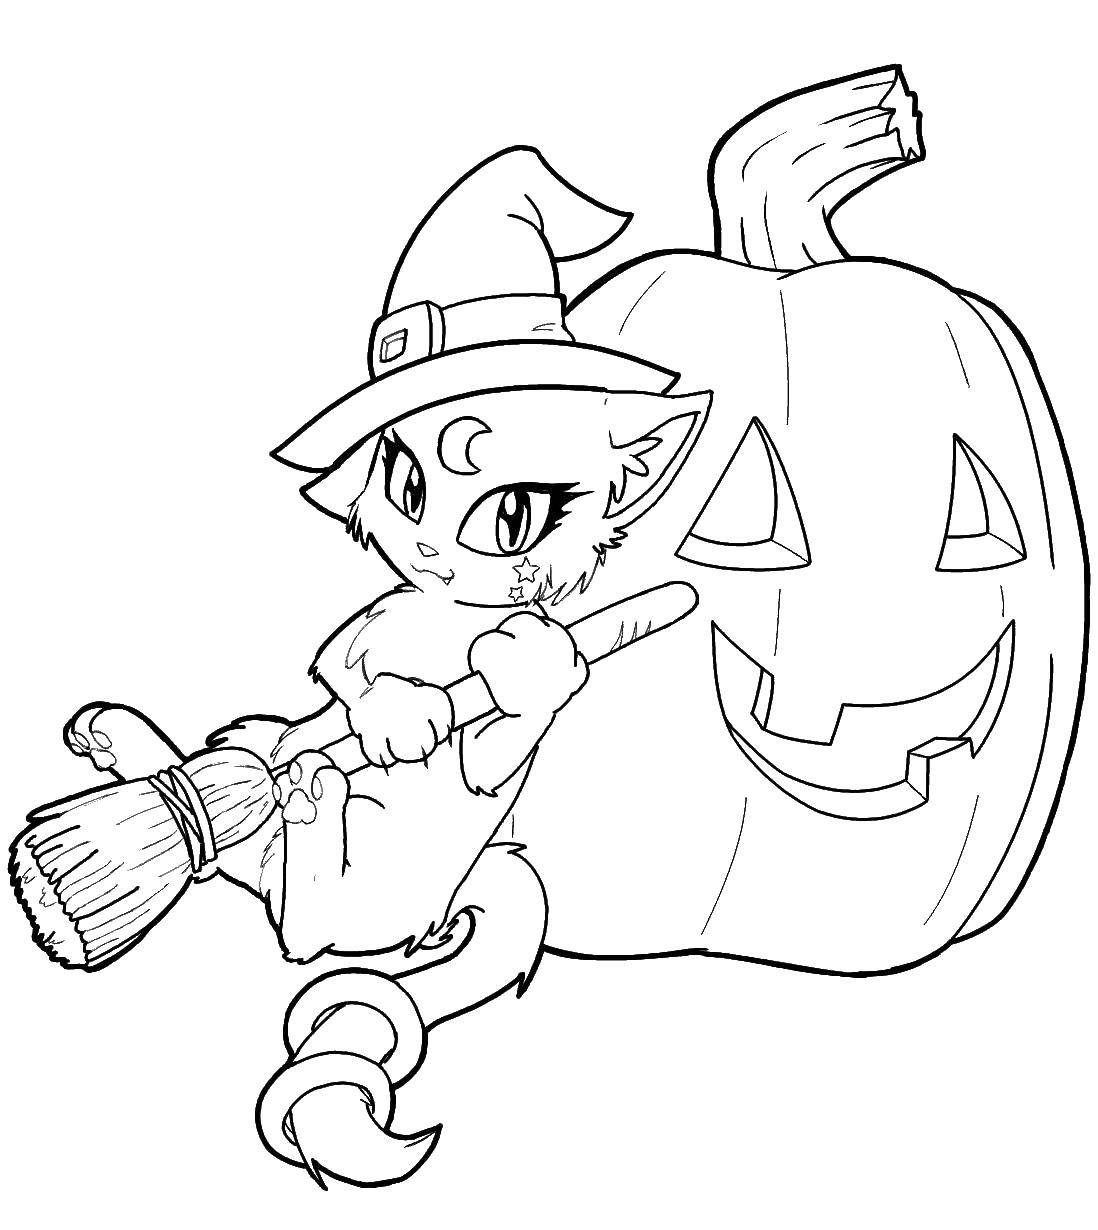 Coloring Cat and pumpkin. Category The cat. Tags:  cat, pumpkin, witch, Halloween.